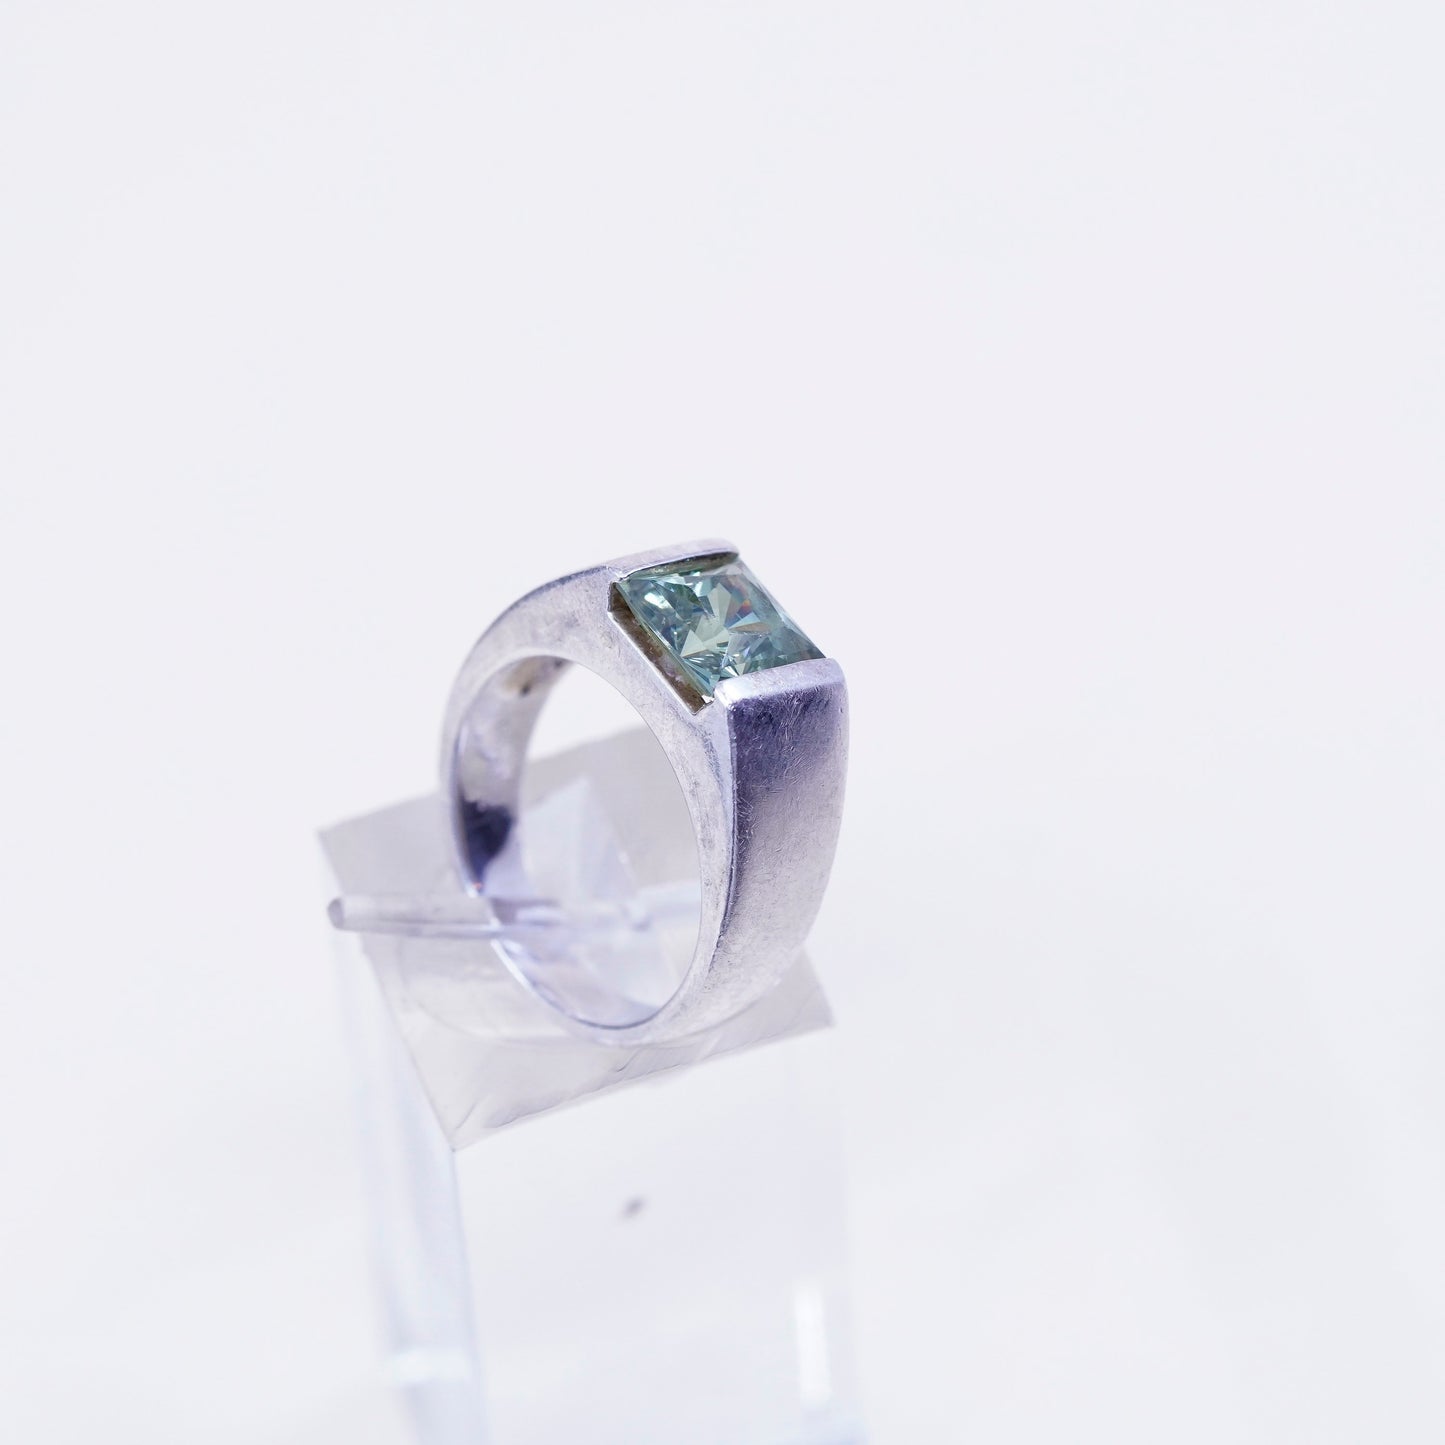 Size 5, JJJ Sterling silver handmade ring, modern 925 band with square peridot